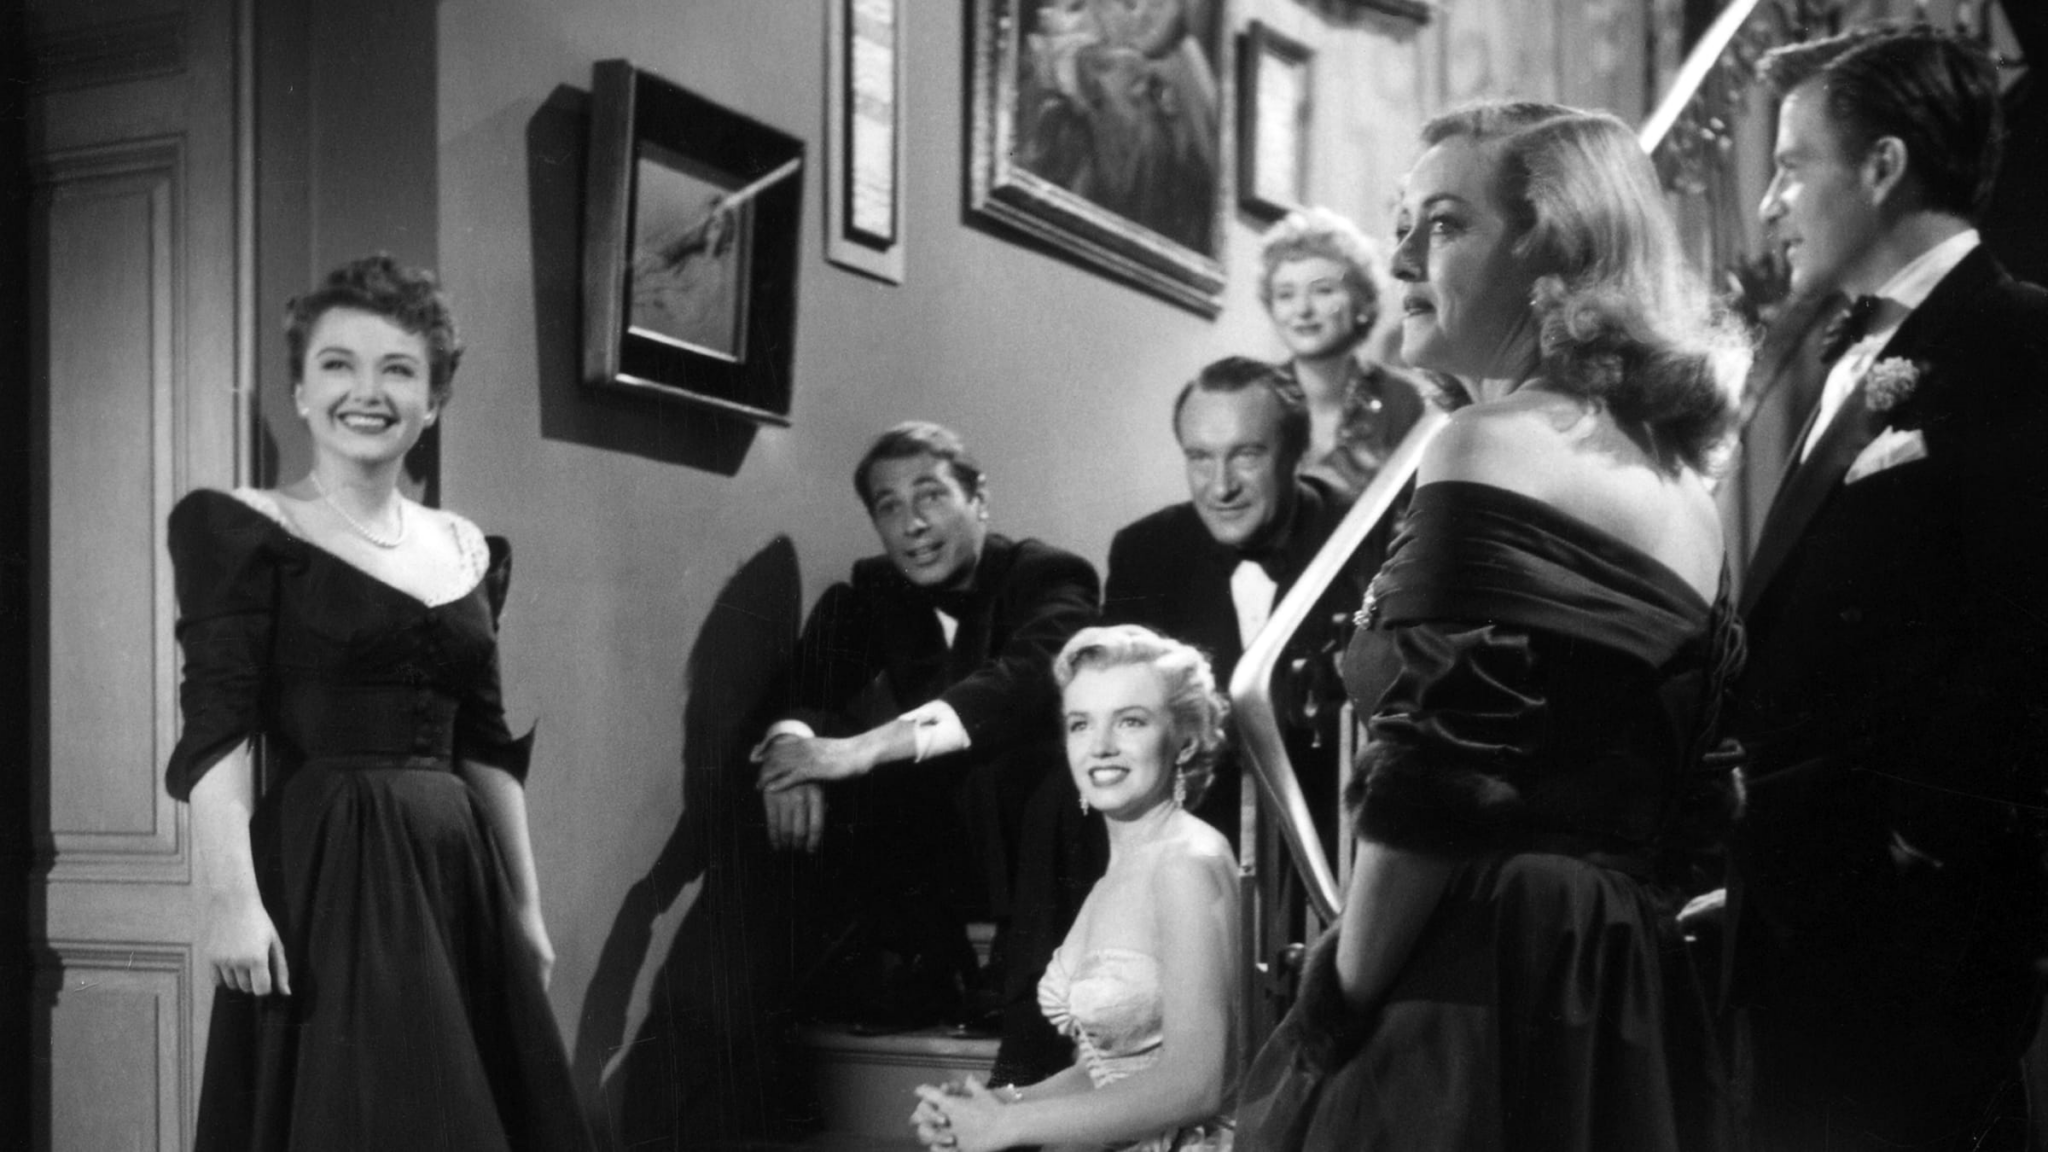 The cast of All About Eve on the staircase at Margo Channing;s apartment